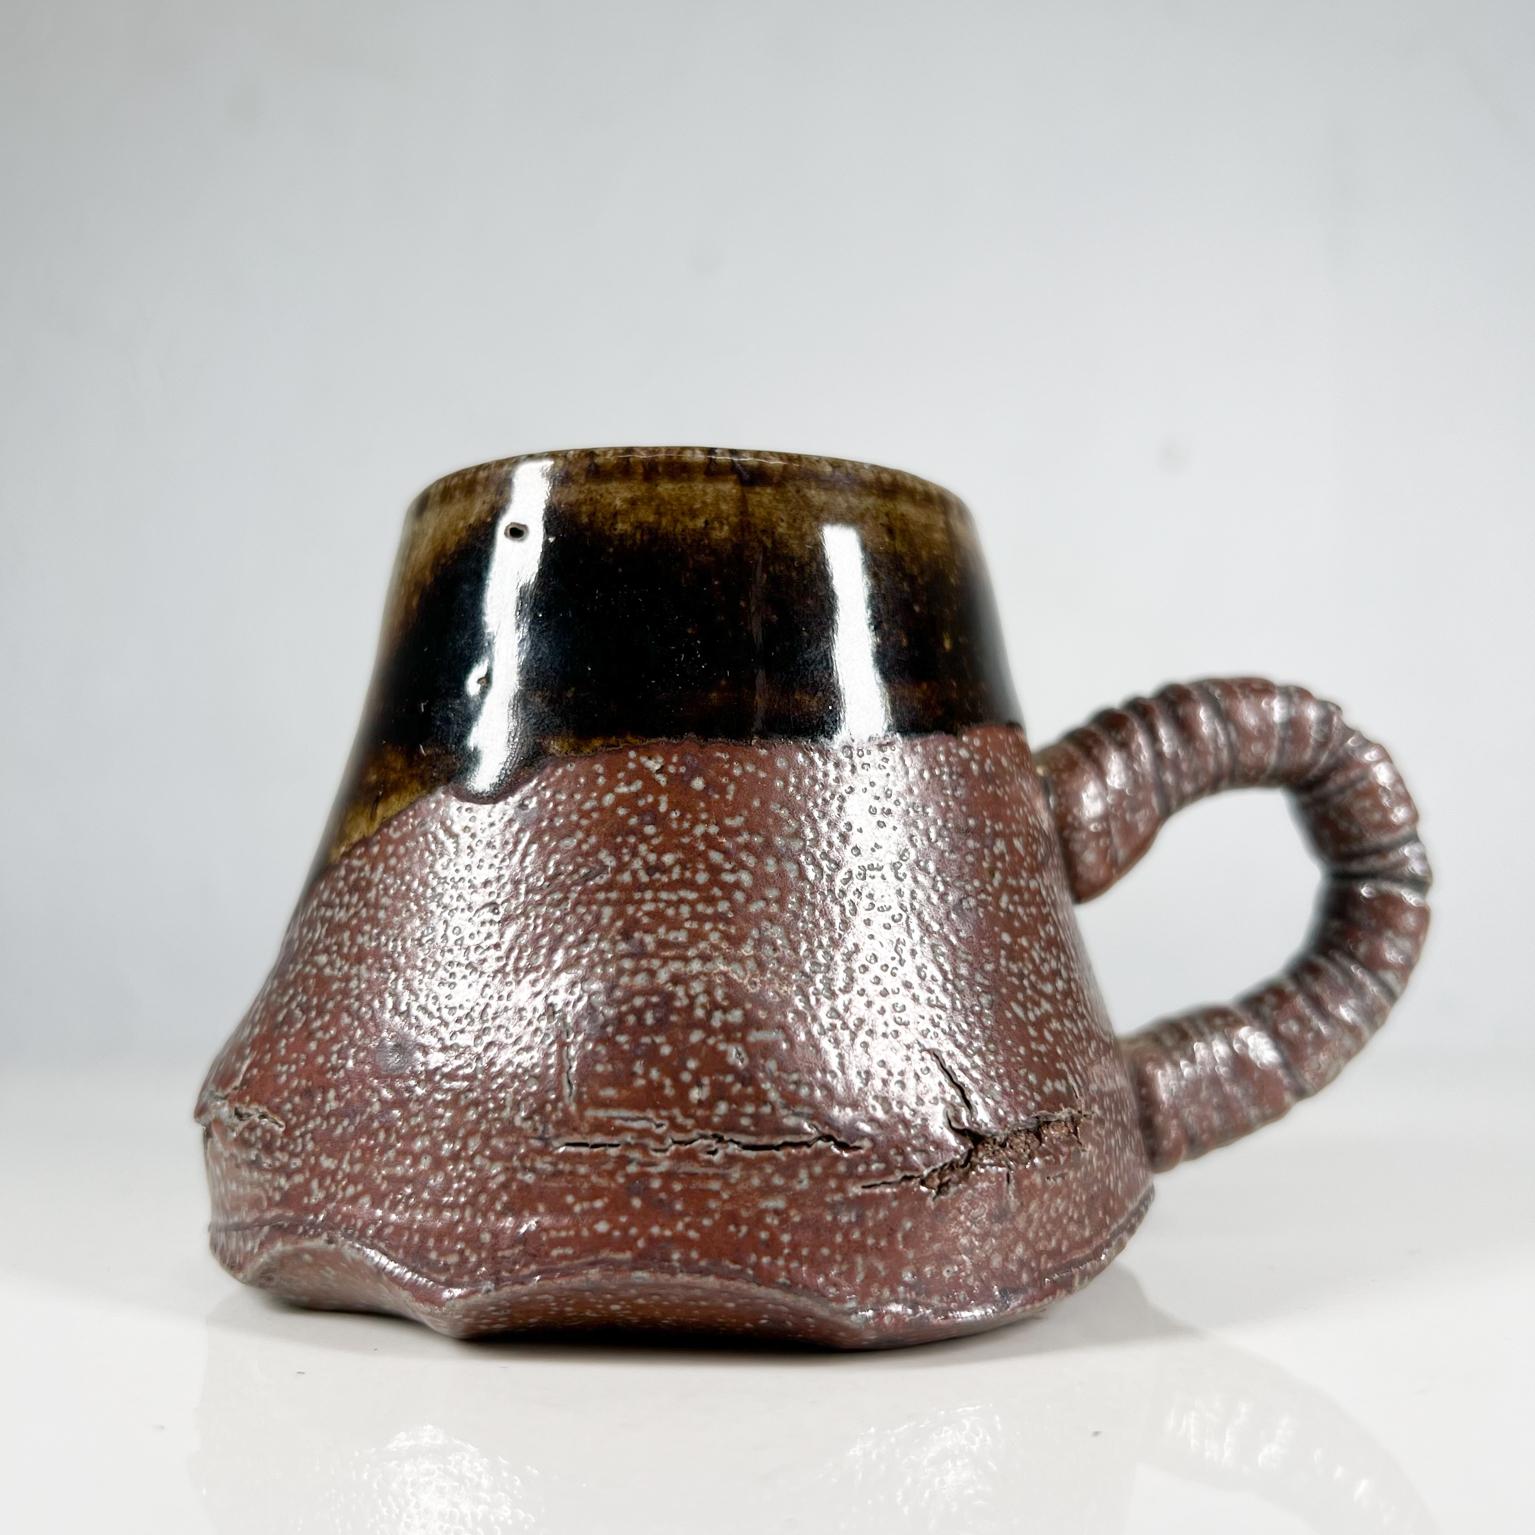 1980s sculptural dark brown mug coffee cup pottery art by Melching
Signed by artist
3 tall x 3.5 w x 5.13 d
Preowned unrestored vintage condition with wear.
Refer to images.